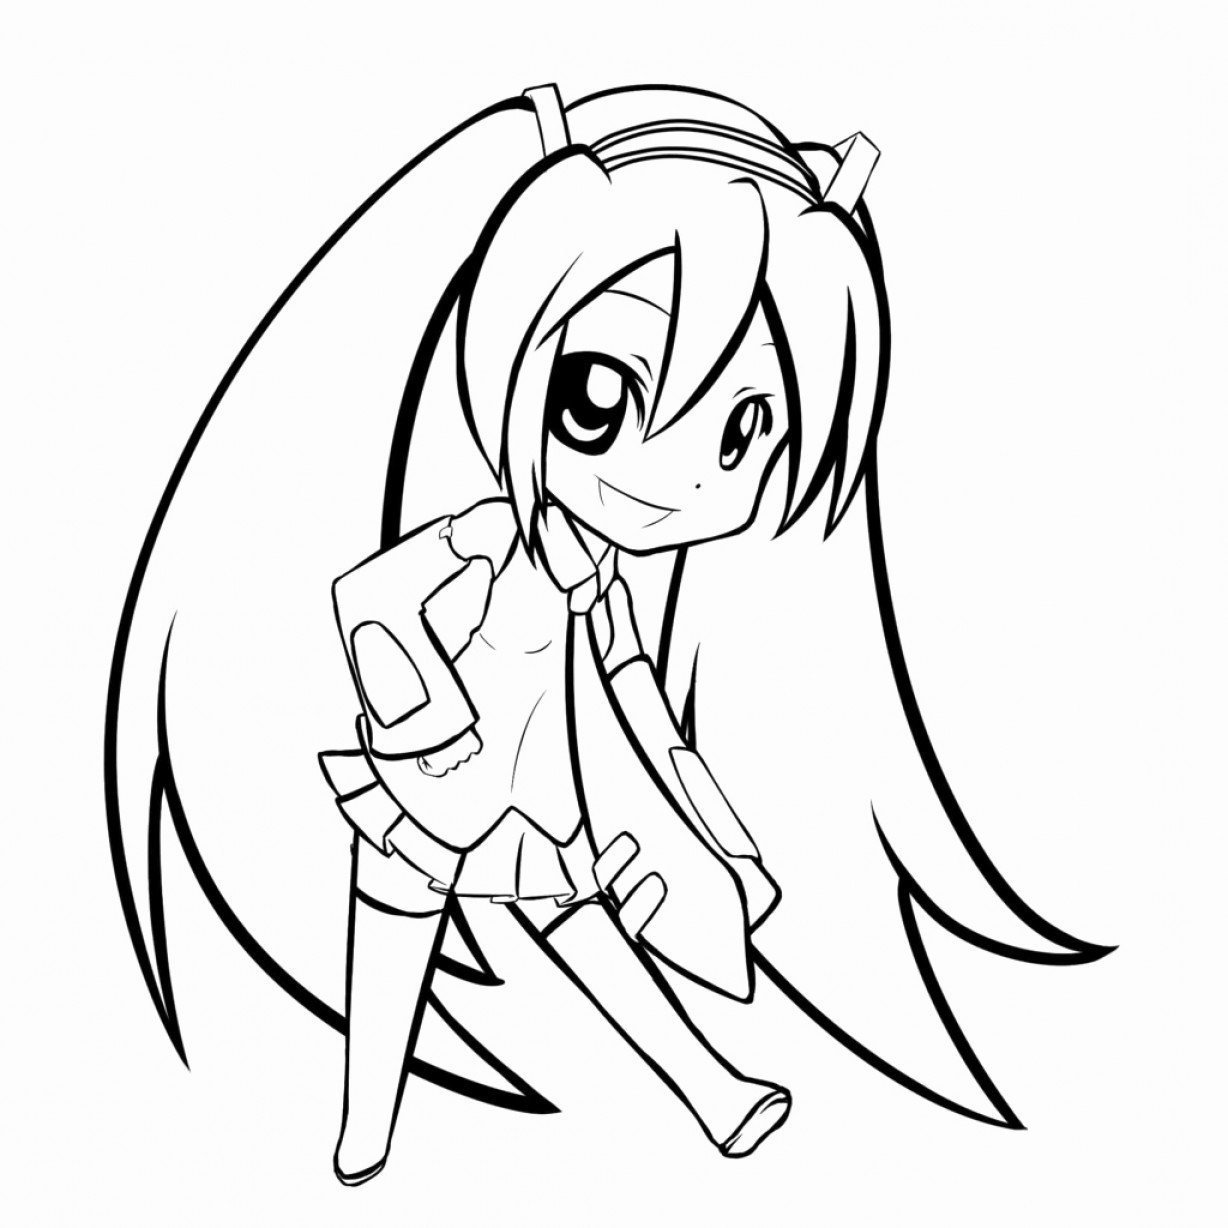 Hatsune Miku Coloring Pages - Coloring Home